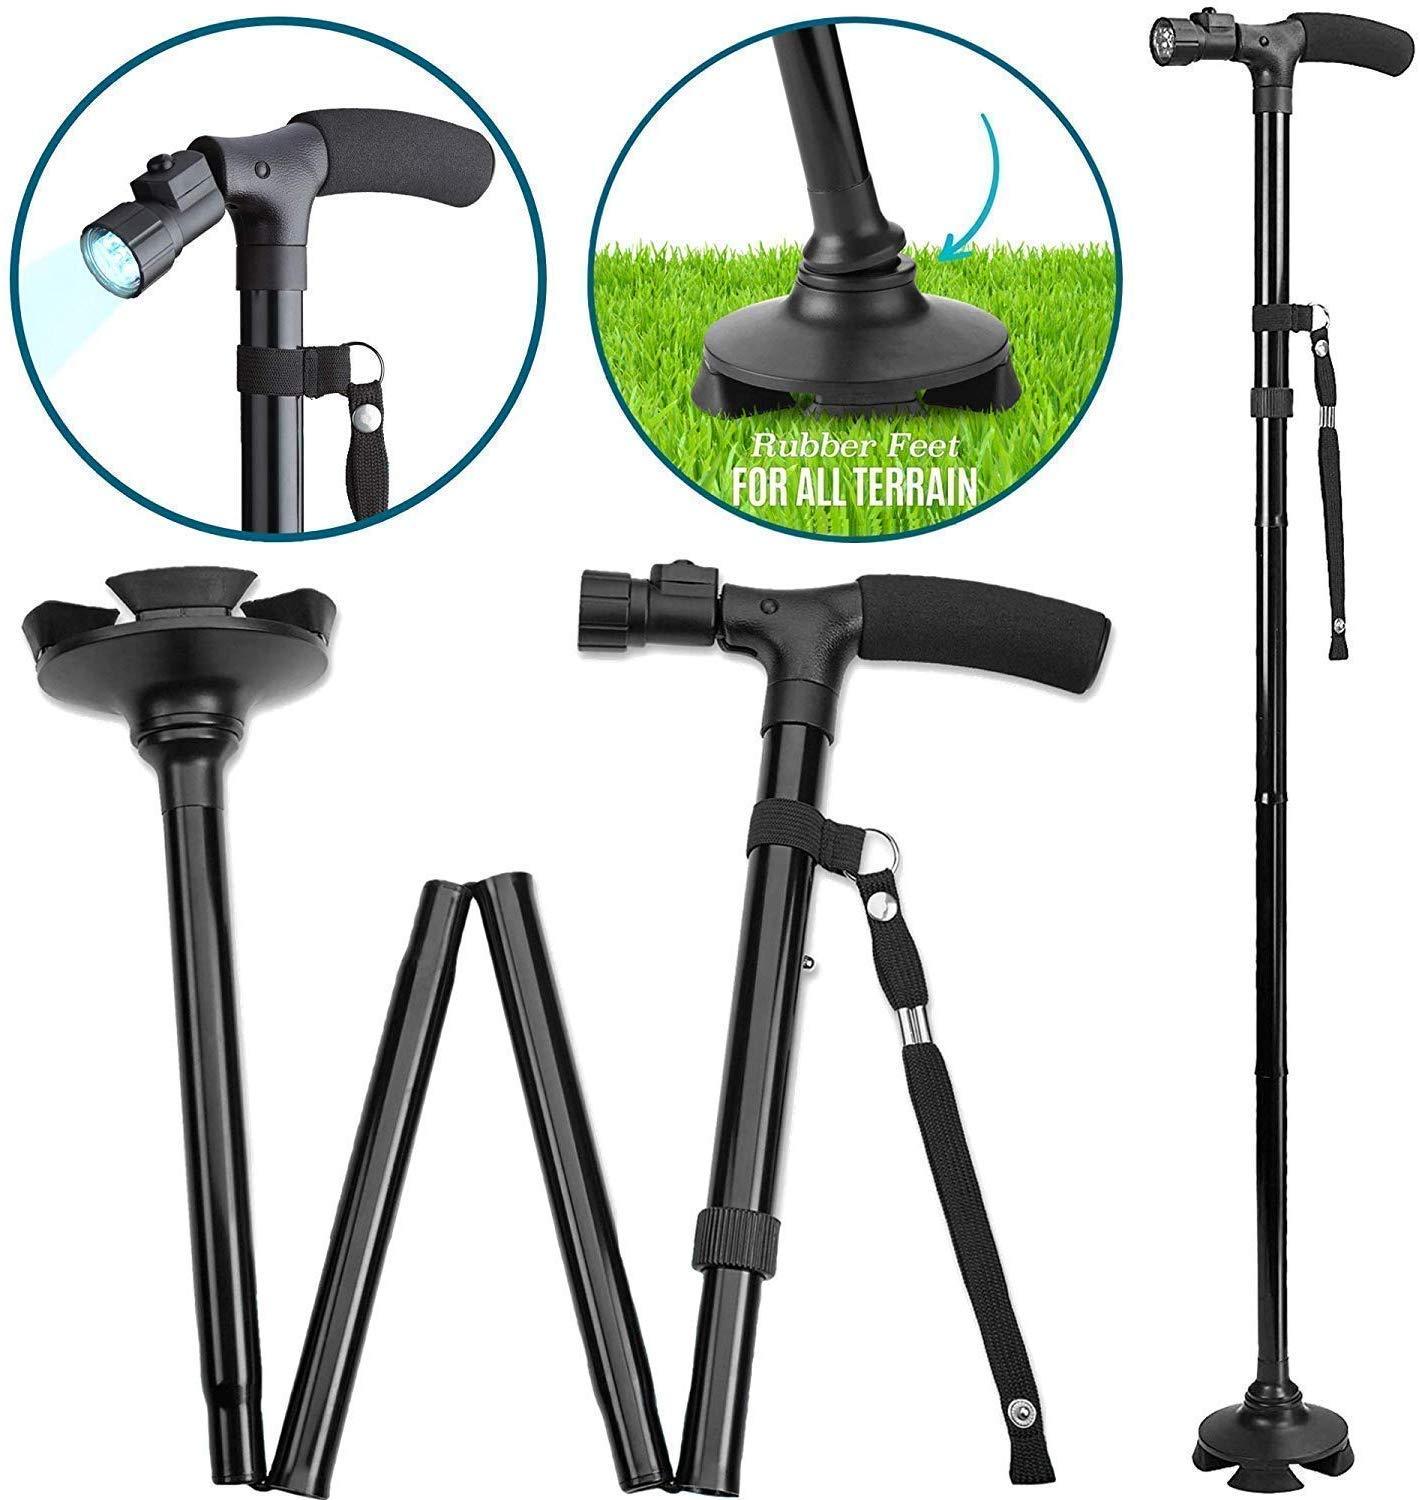 LED Smart Walking Stick - Local to Vocal